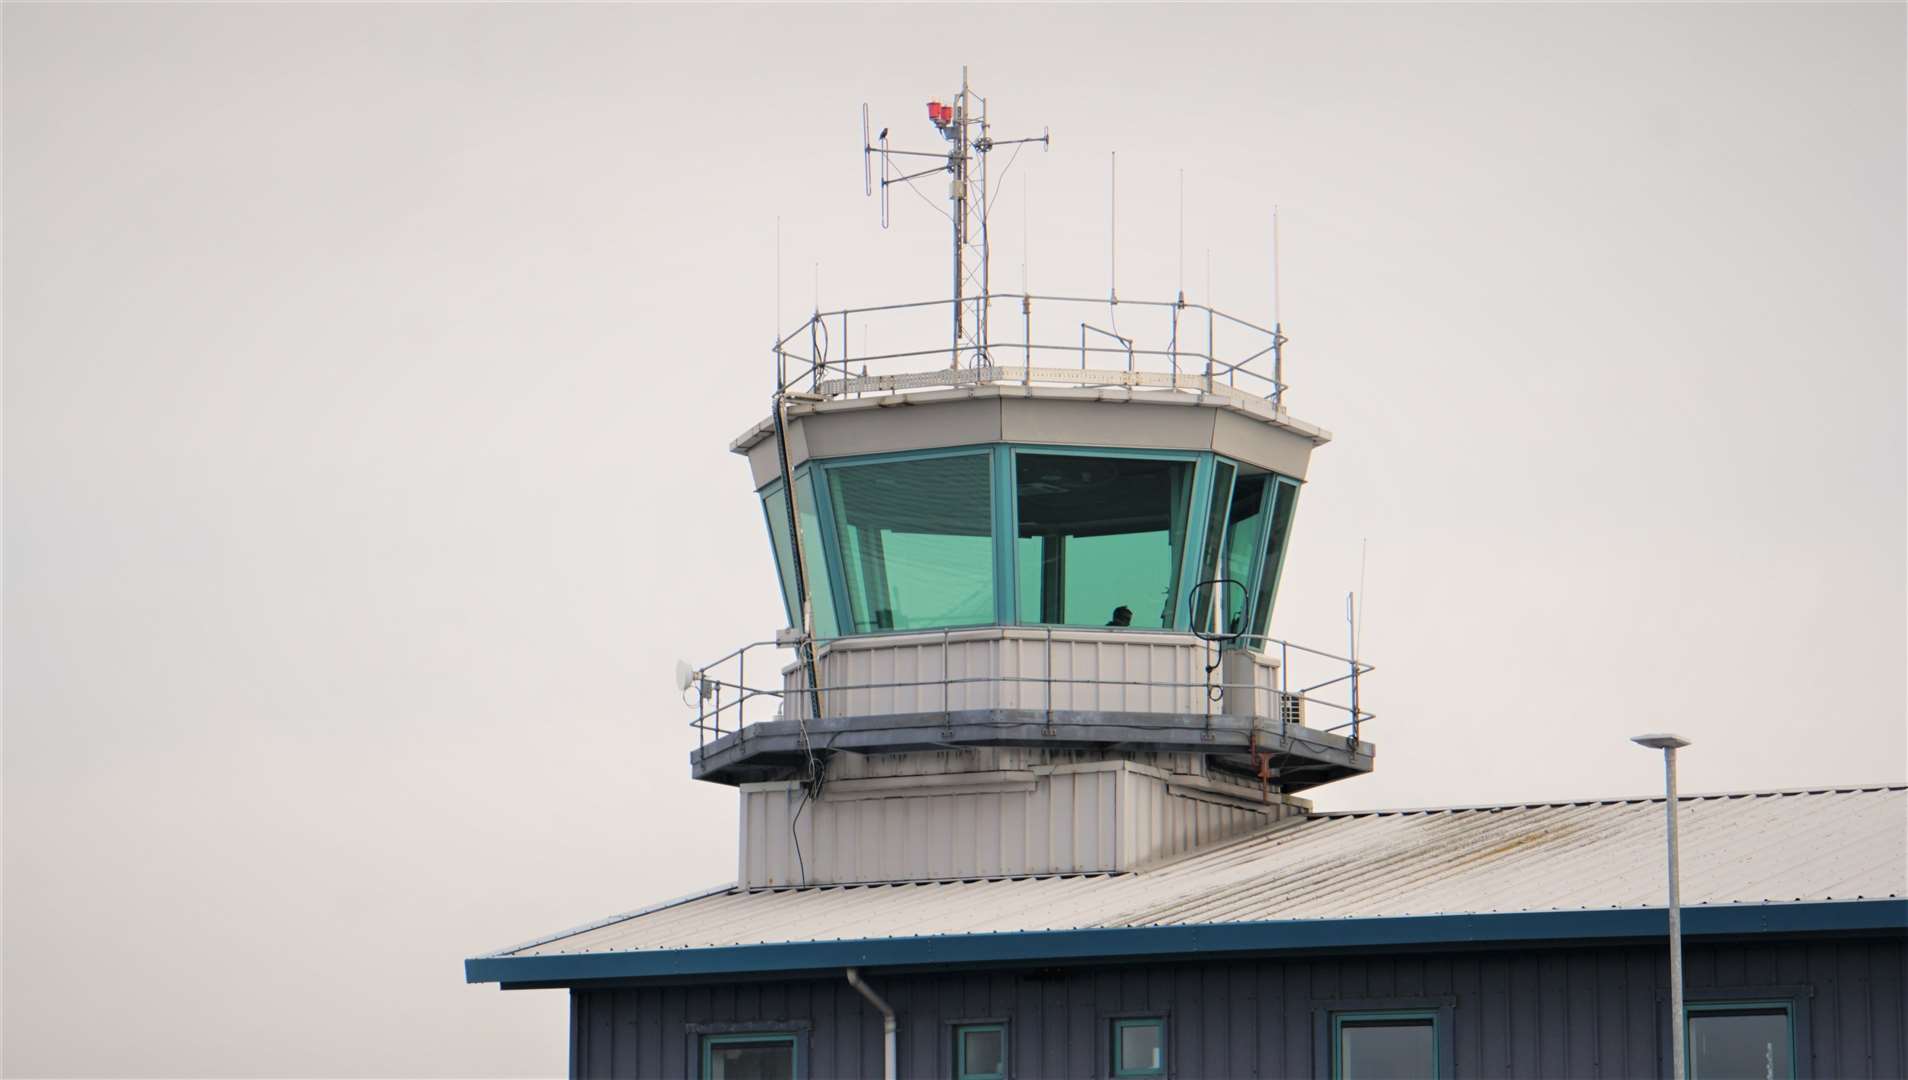 Local politicians have warned that HIAL's proposals would downgrade the service at Wick John O'Groats Airport.